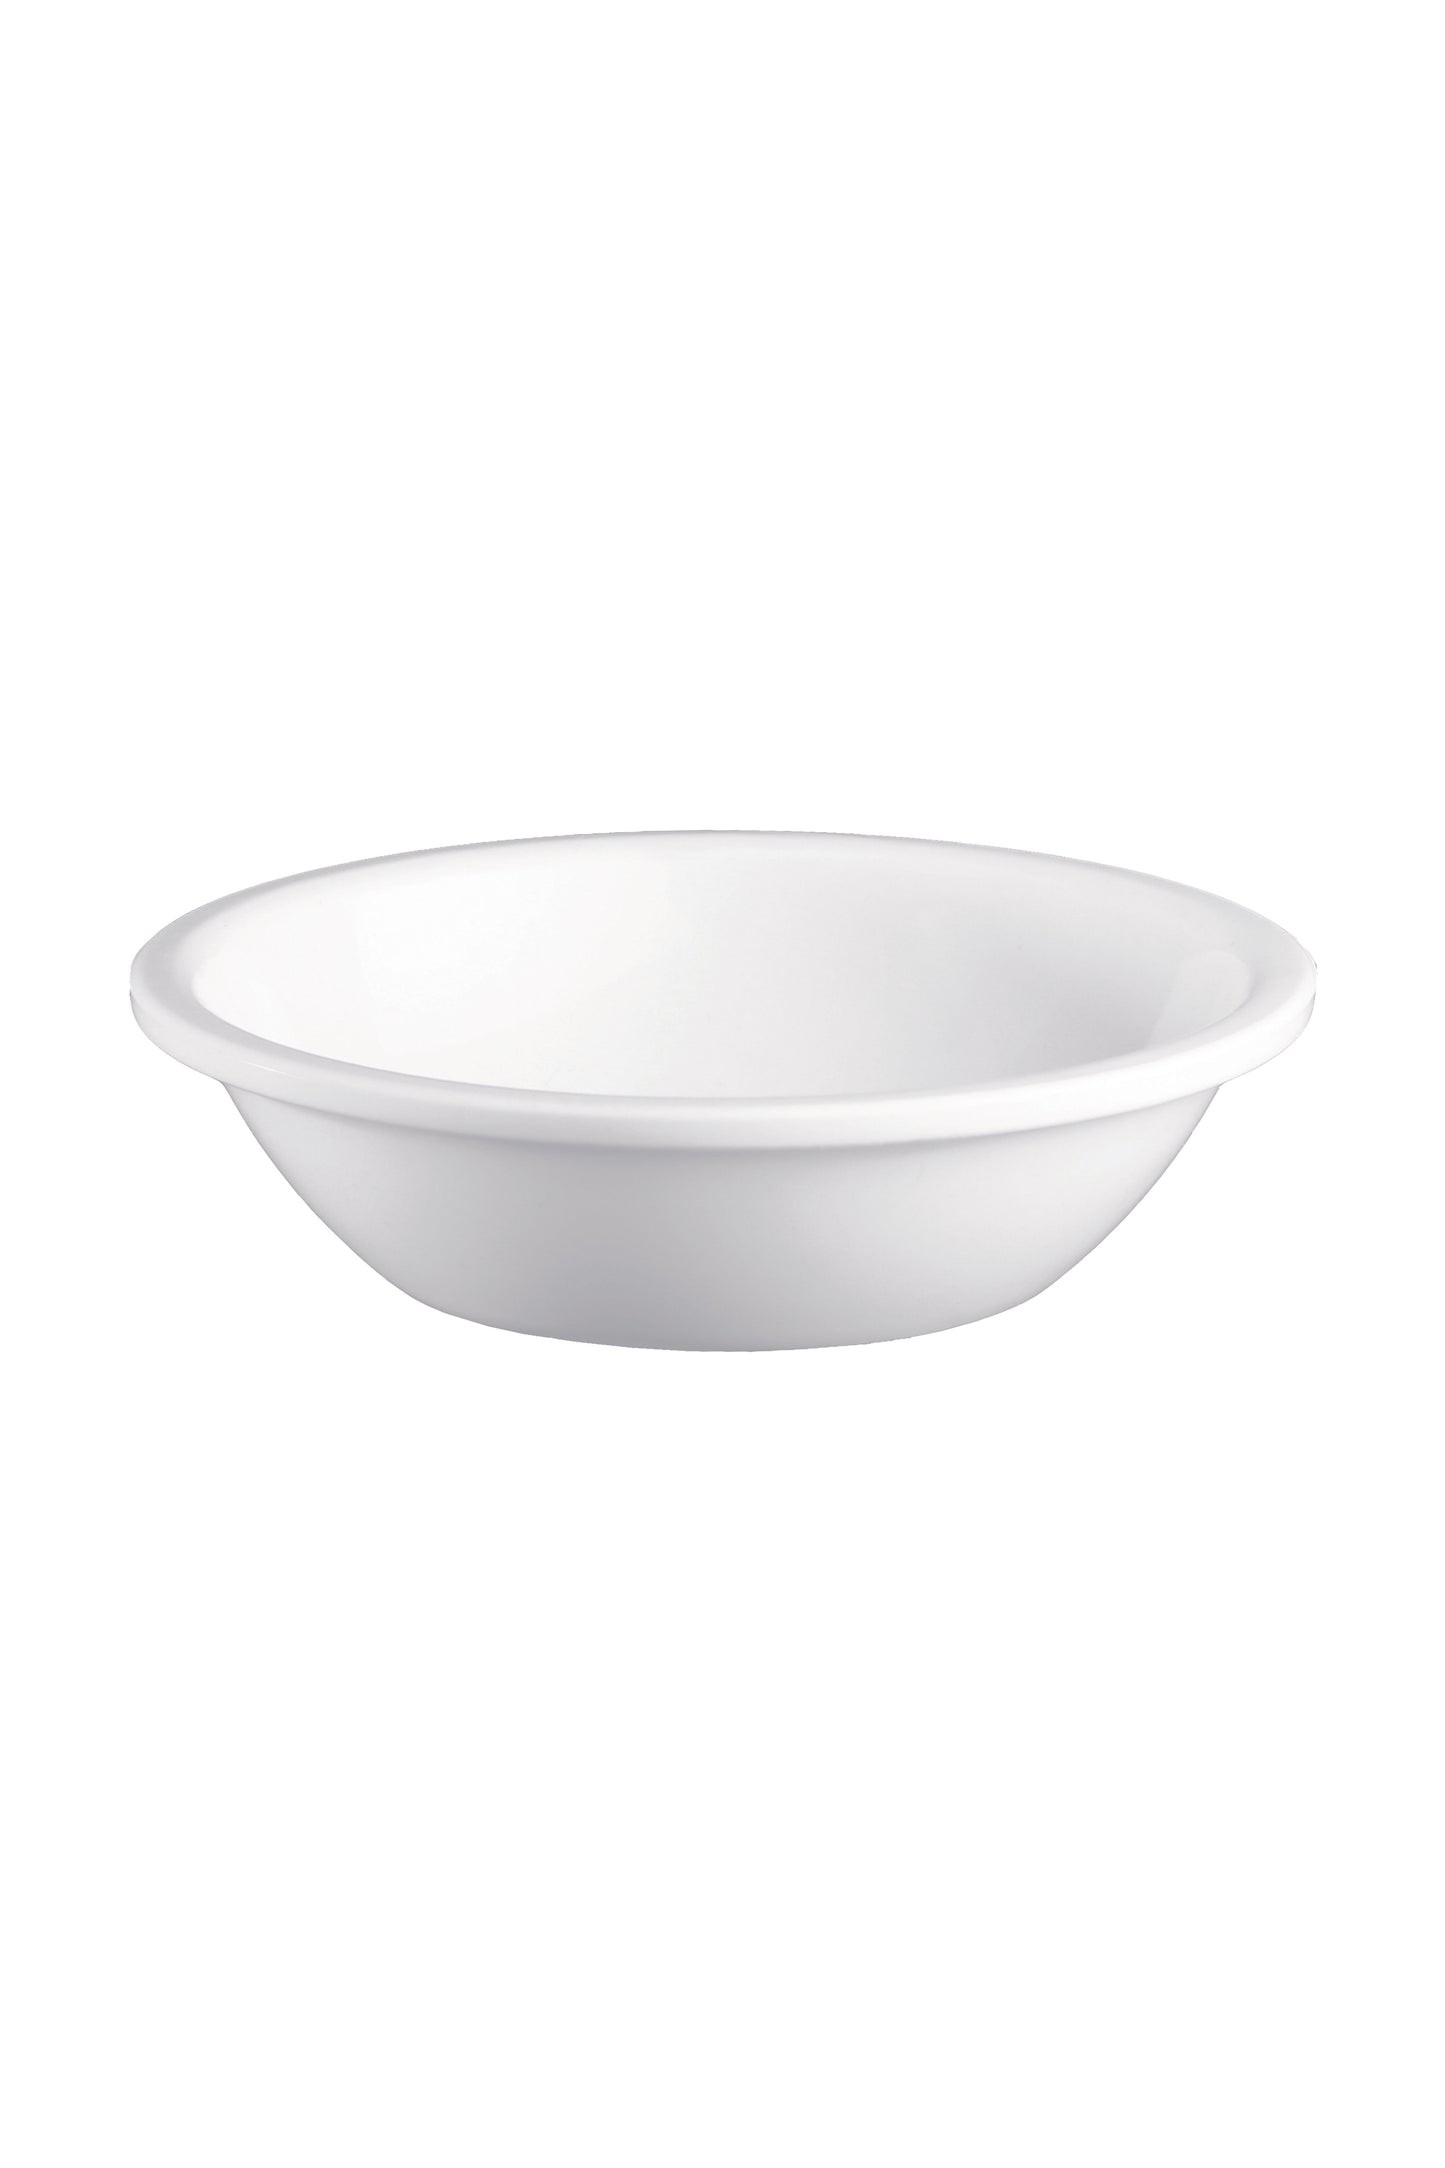 Indulge in healthy and delicious meals with our Plastic Veg Bowl Big. Designed for convenience and durability, this bowl is perfect for serving your favorite vegetables, salads, or soups.